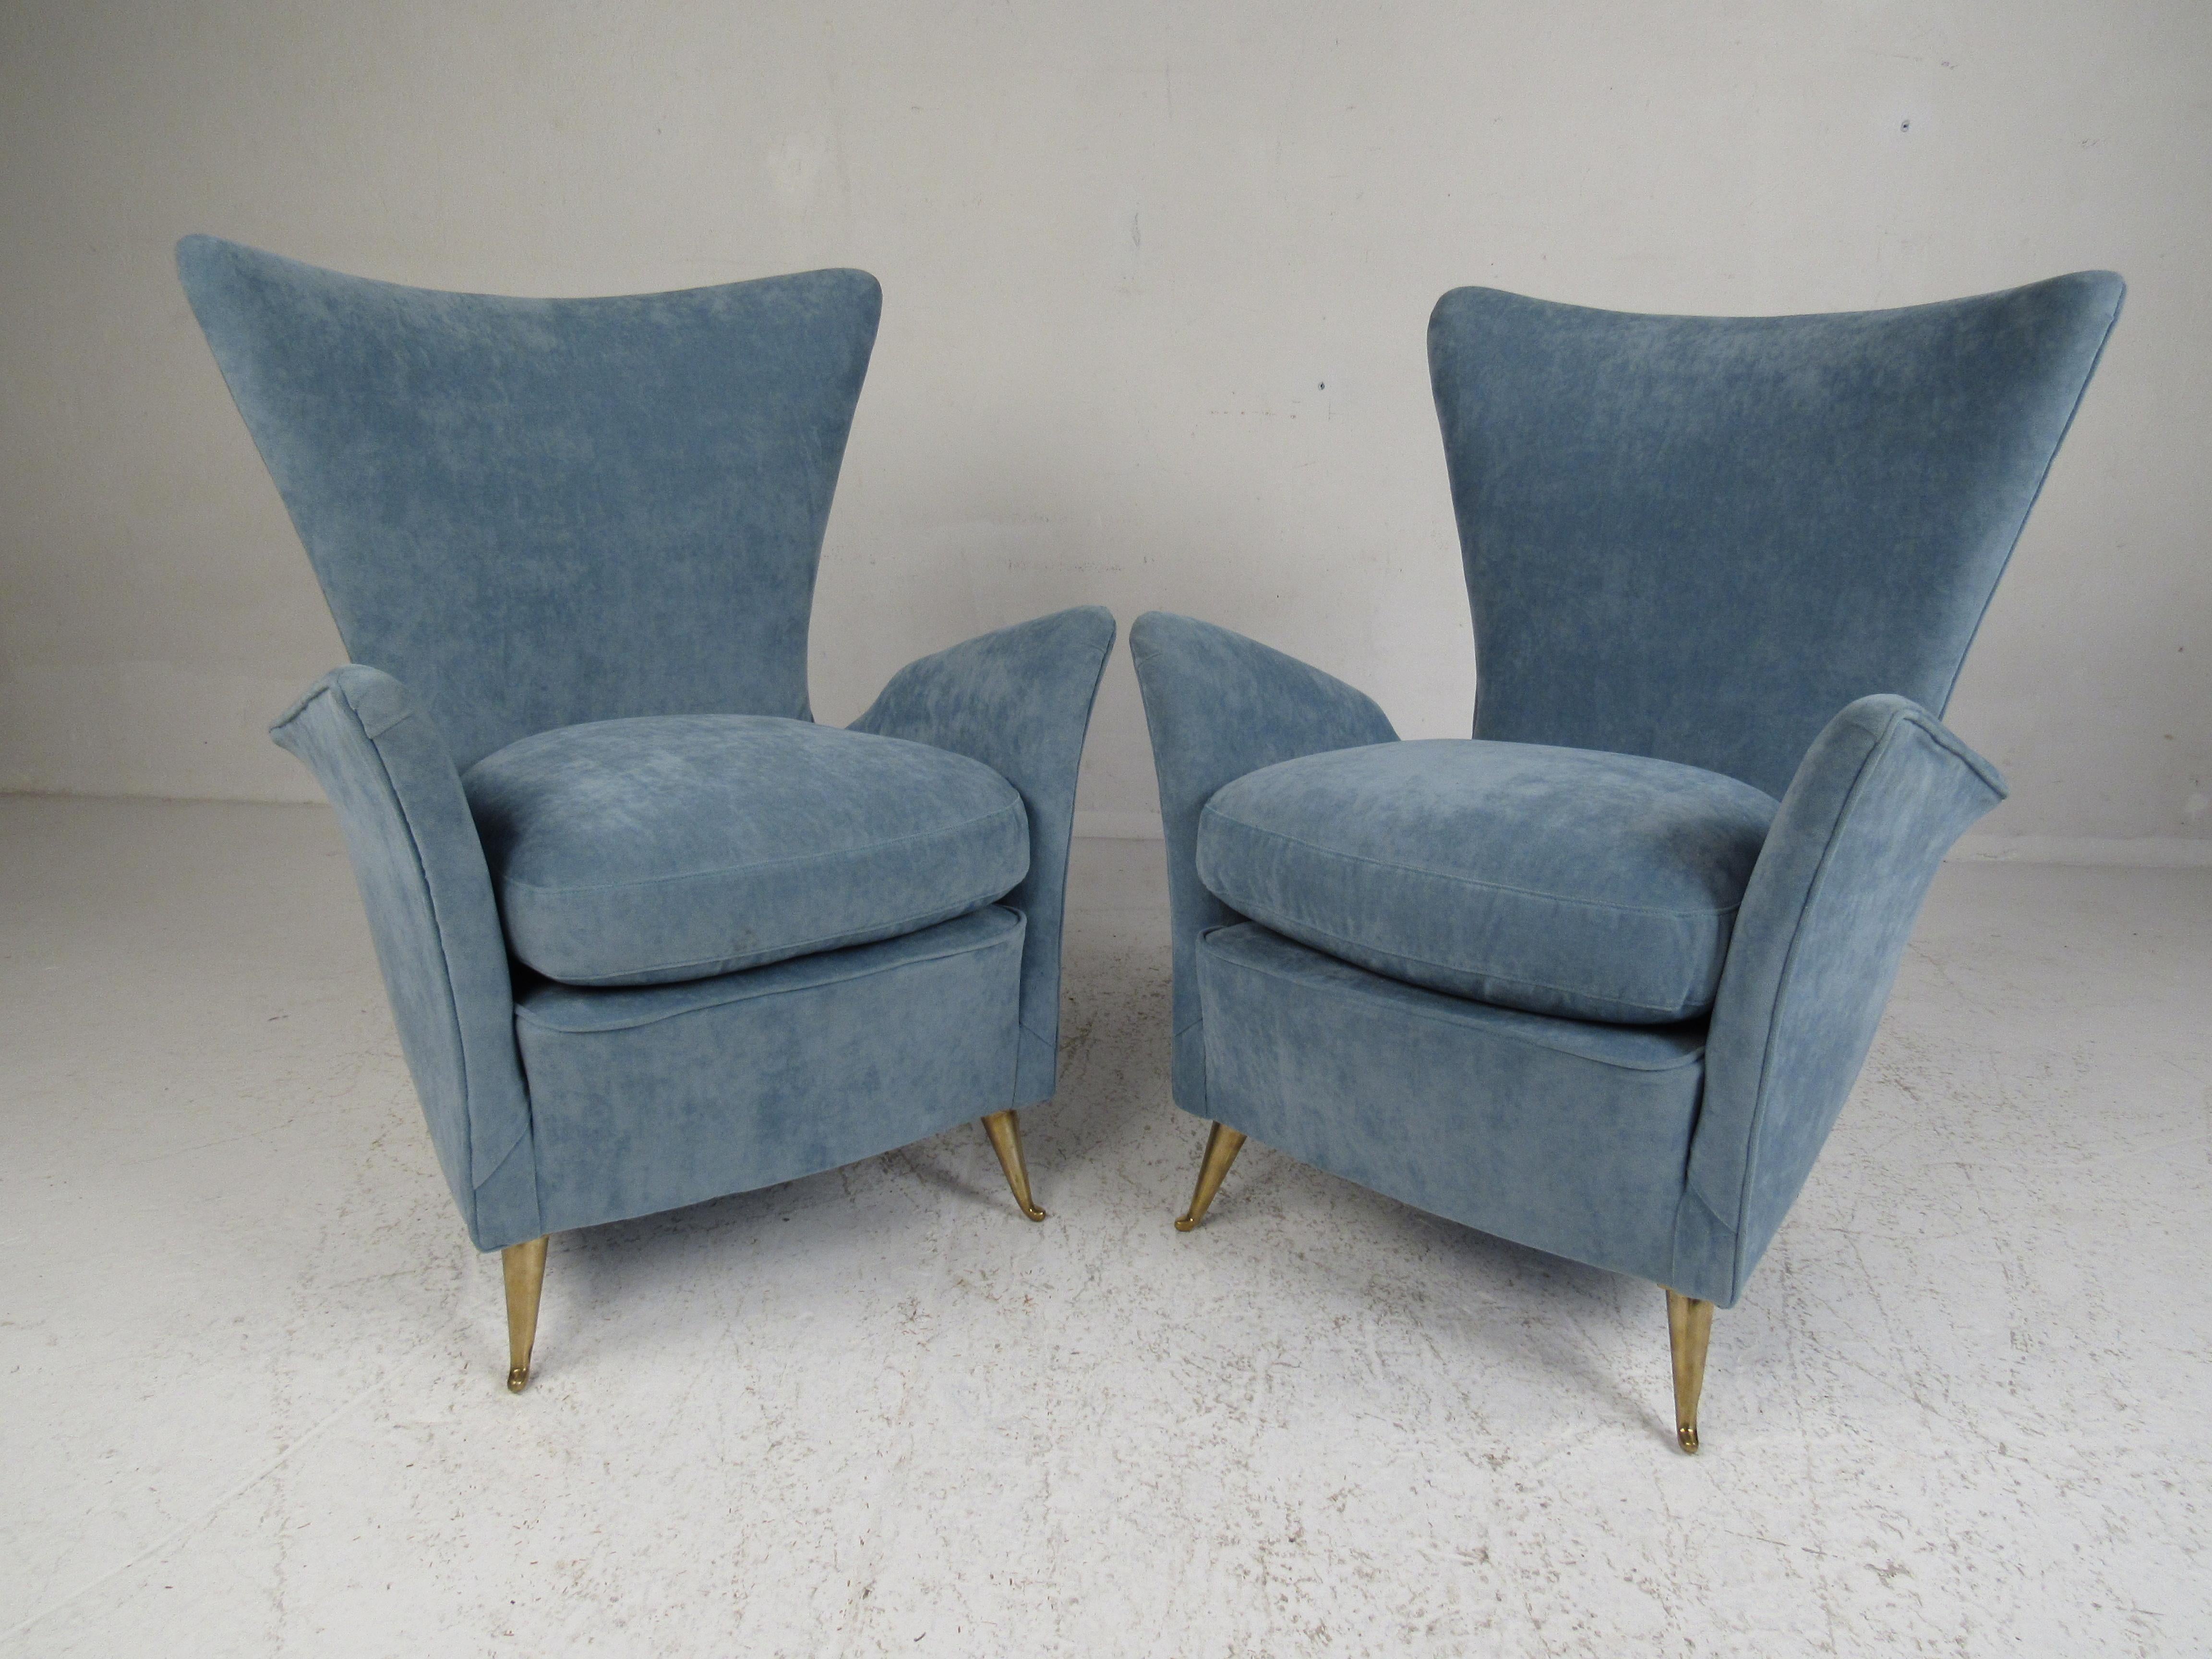 This beautiful pair of vintage modern Italian armchairs feature an impressive winged backrest and armrests. A sleek design that sits on splayed brass legs with unusual bent feet. The thick padded seats are covered in plush light blue fabric. This